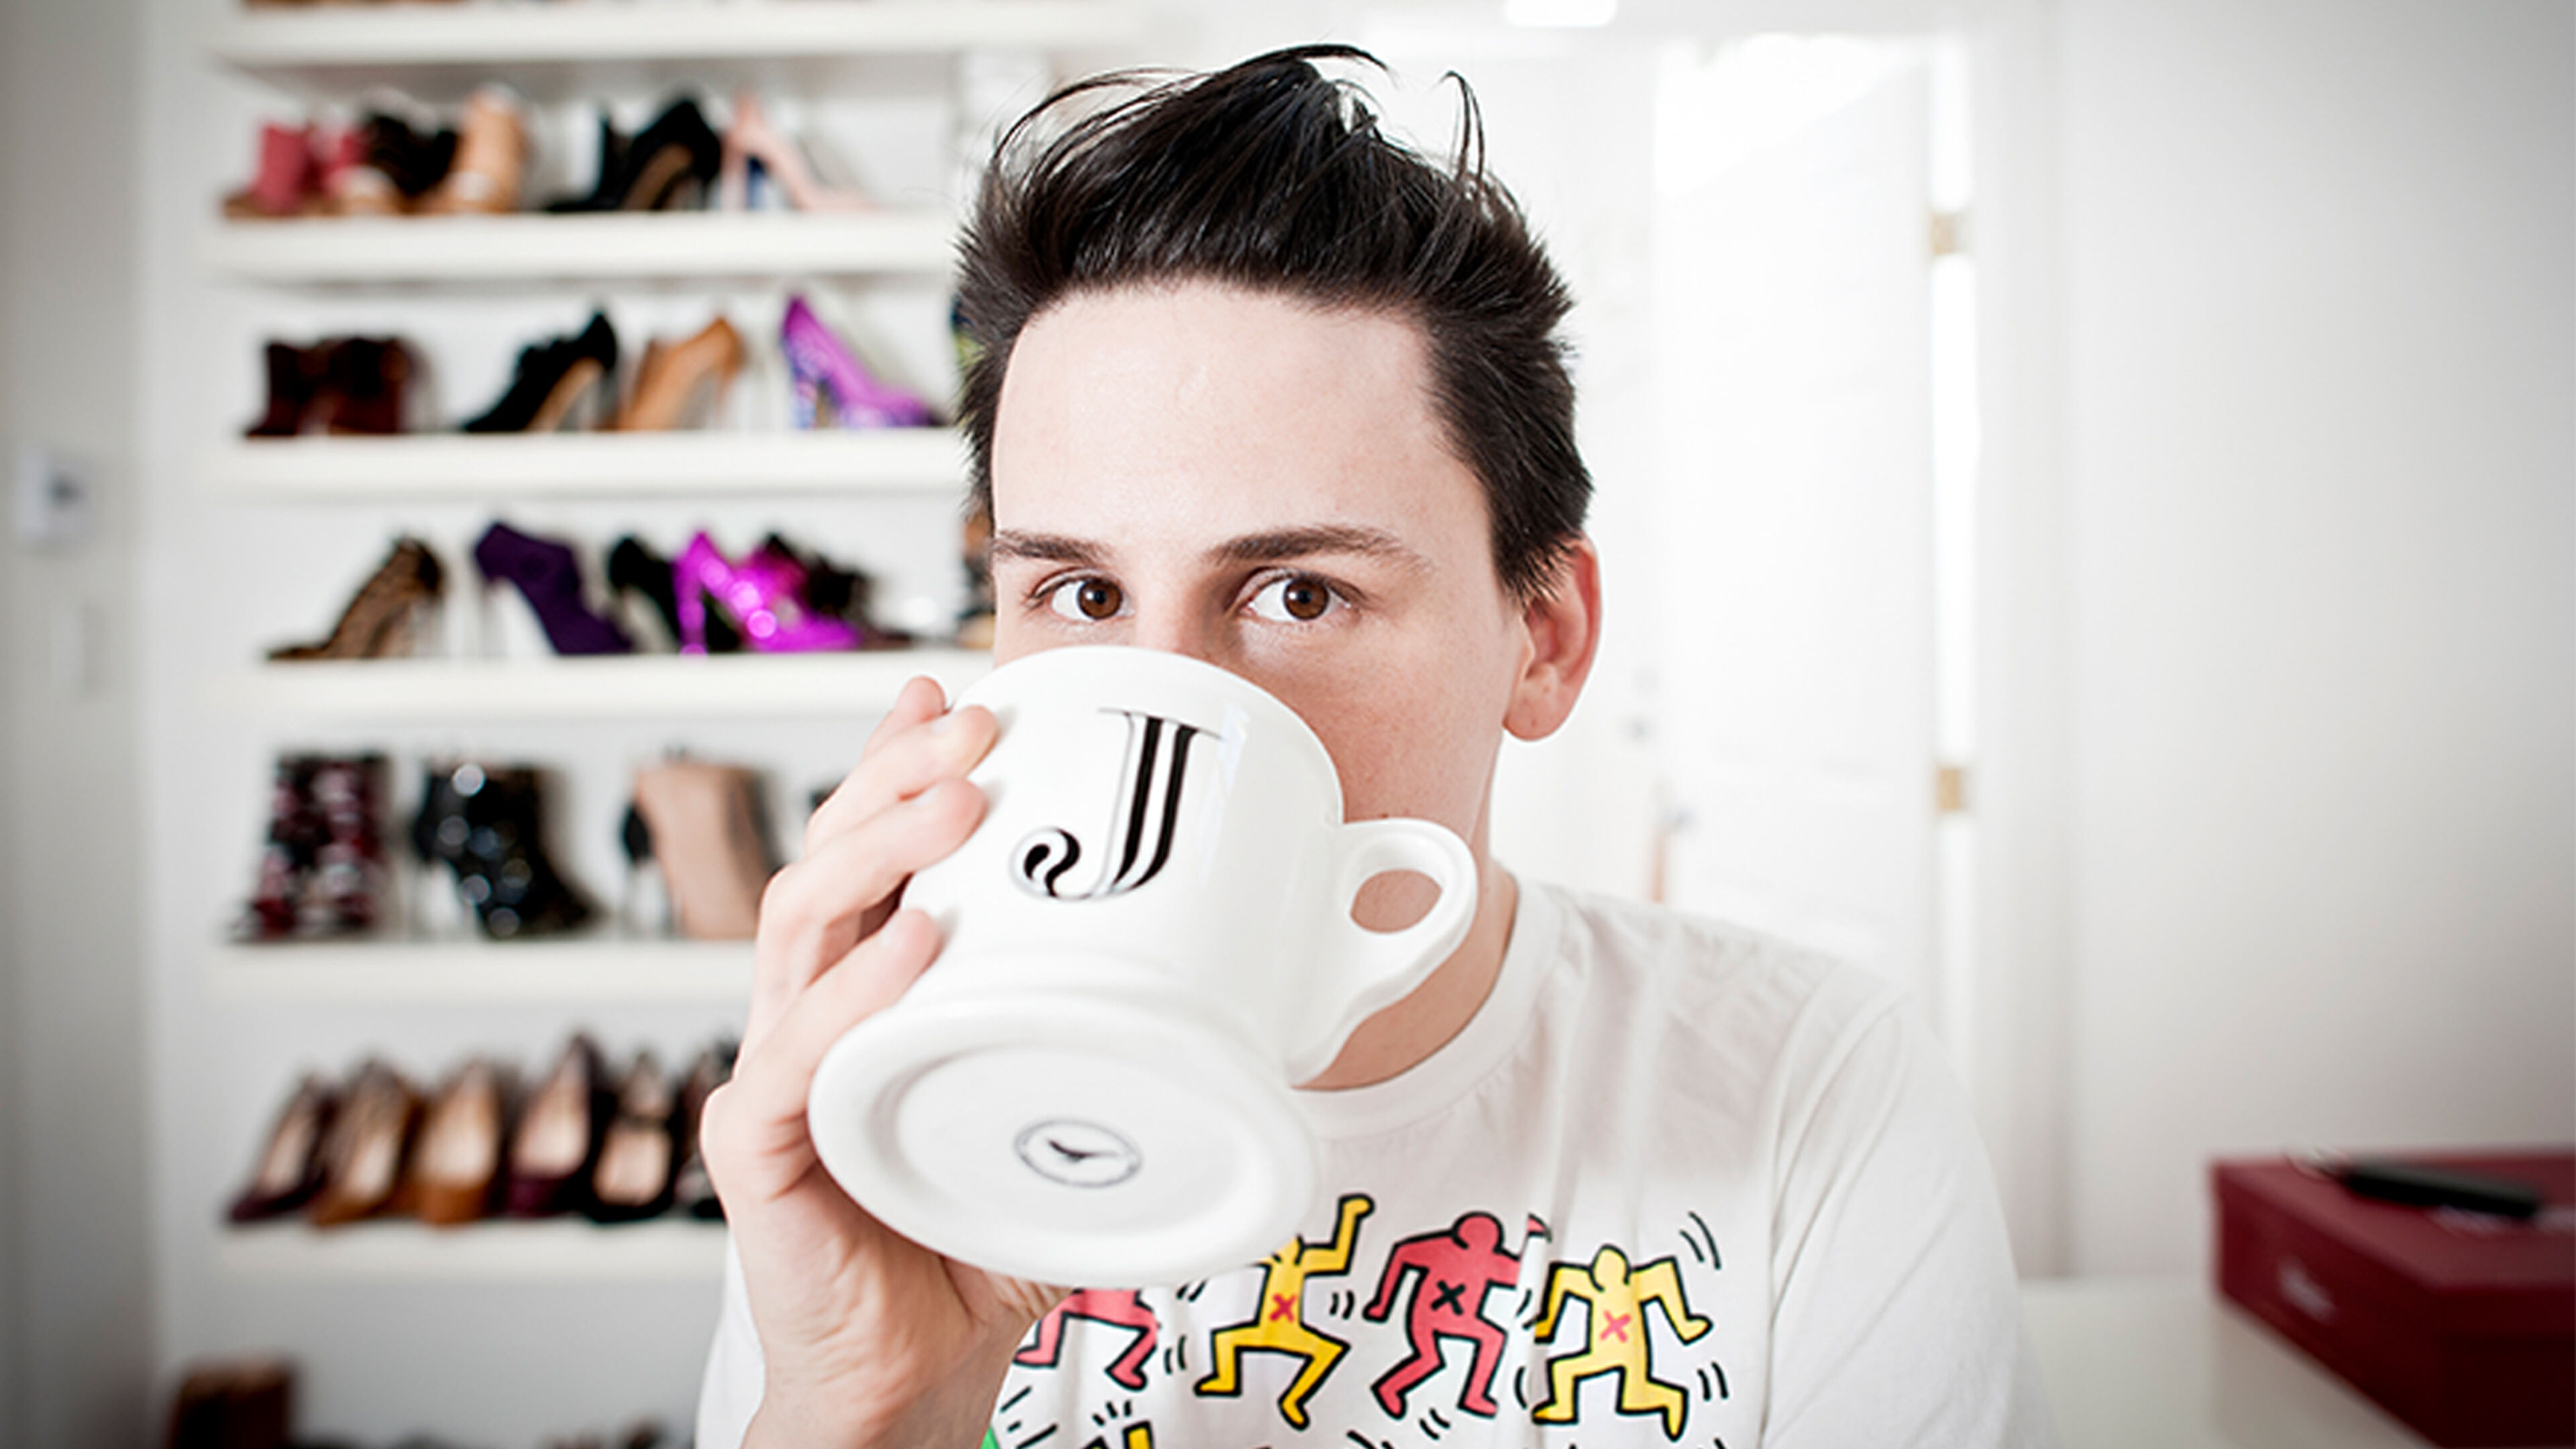 A young man with an edgy hairstyle sips from a creatively designed coffee mug, his gaze meeting the camera, with a backdrop of a colorful shoe collection.